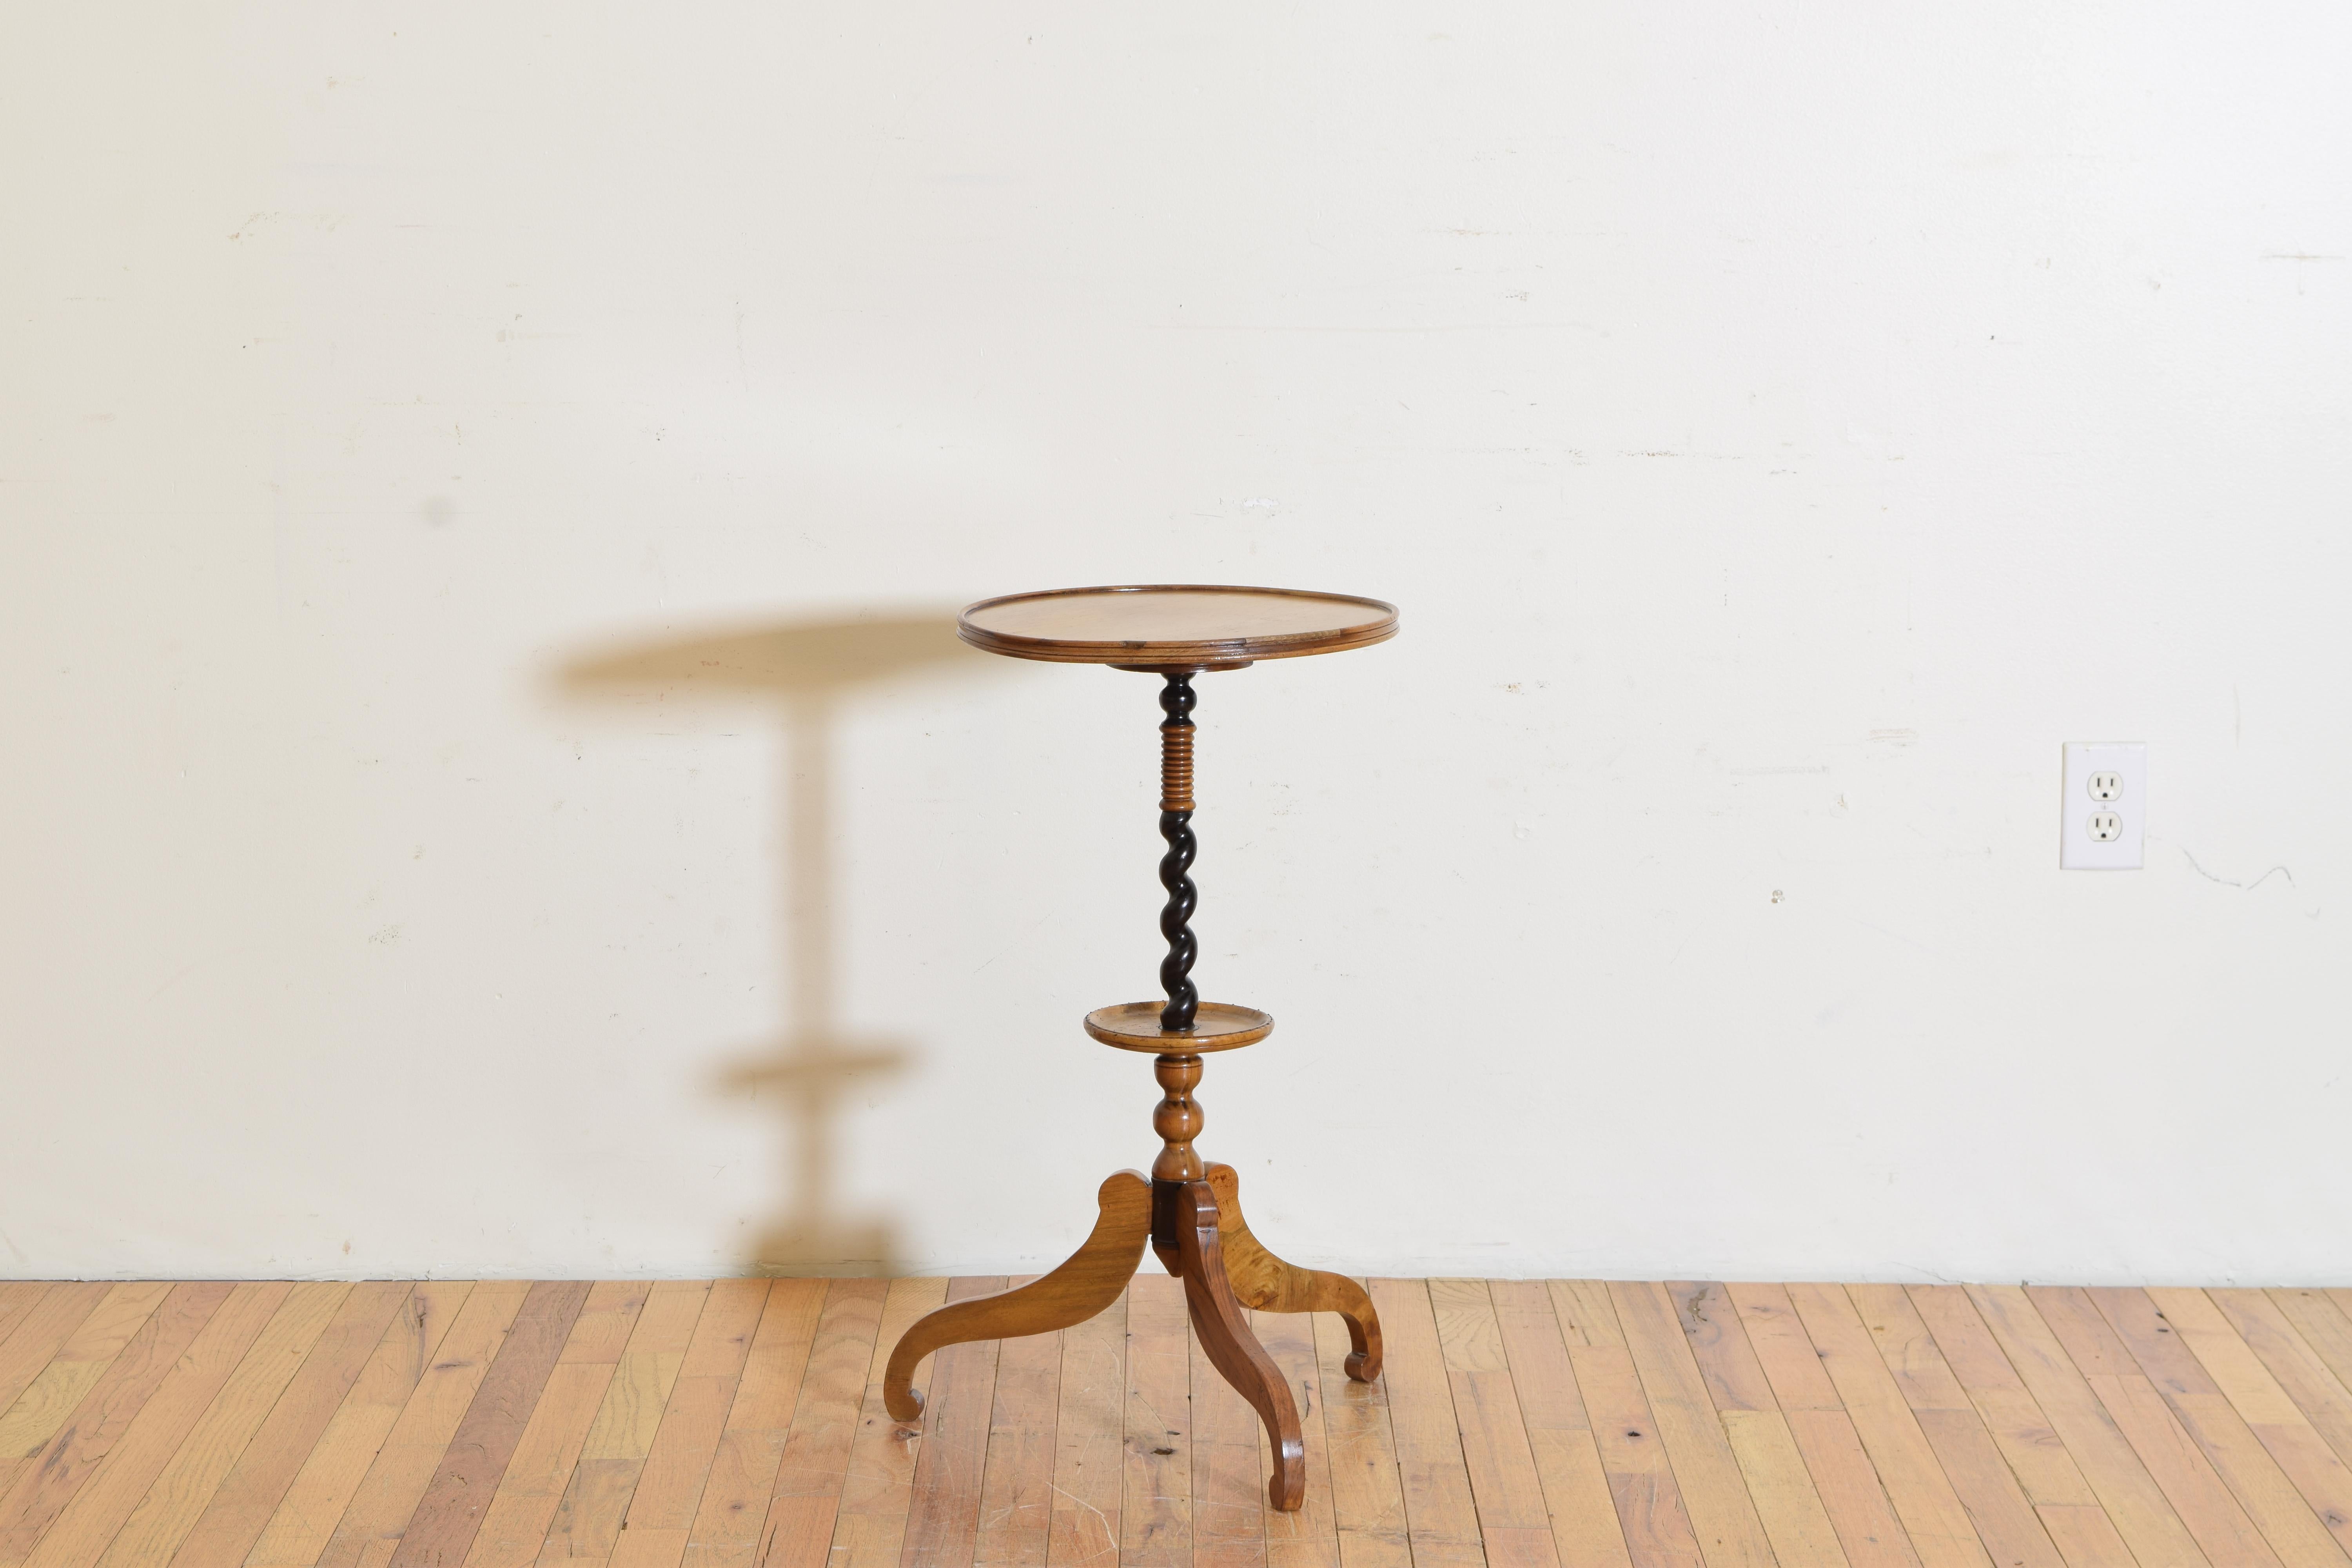 Having two tiers with molded edges raised on a spiral twist pedestal and ending on a tripartite base.